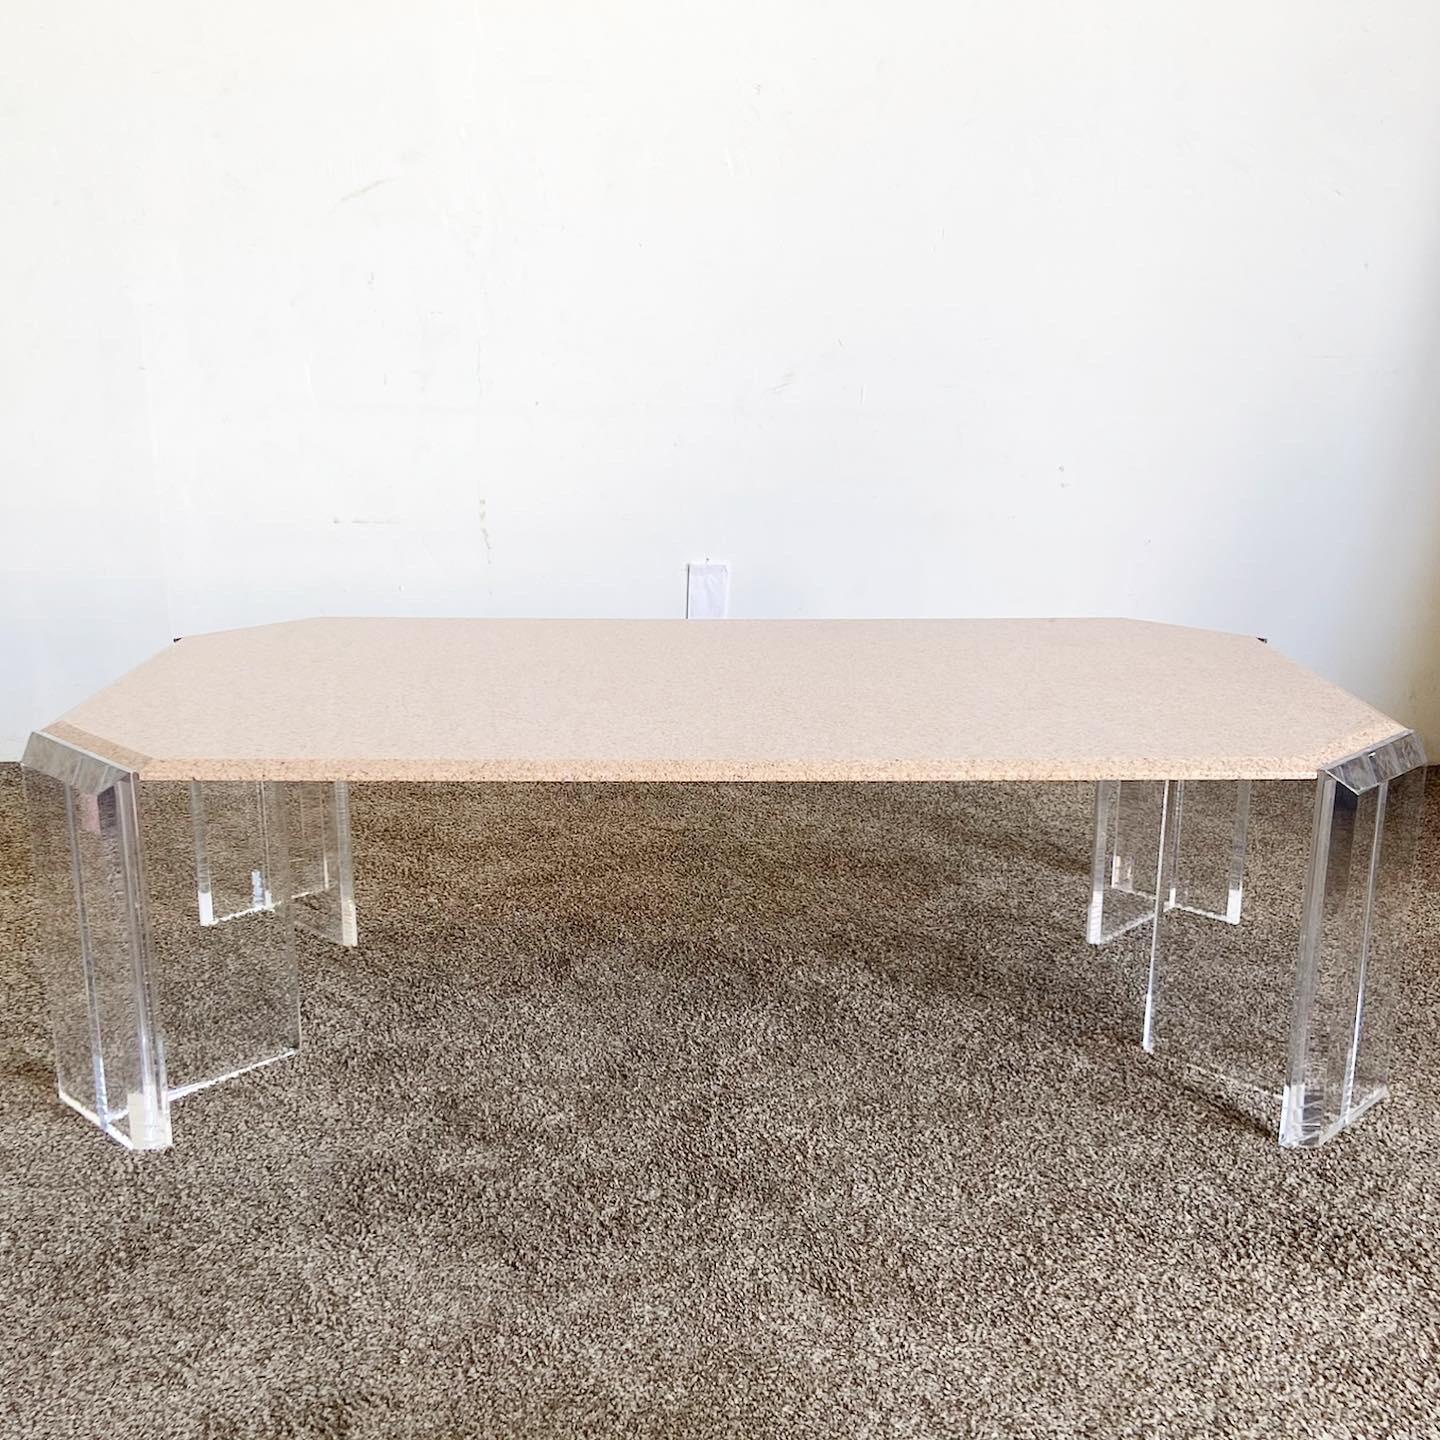 Embrace the elegance of postmodern design with our Rectangular Inlaid Granite Top Lucite Coffee Table. This stunning piece pairs a luxurious inlaid granite top with a sleek, transparent Lucite base, effortlessly merging luxury and modernity. The